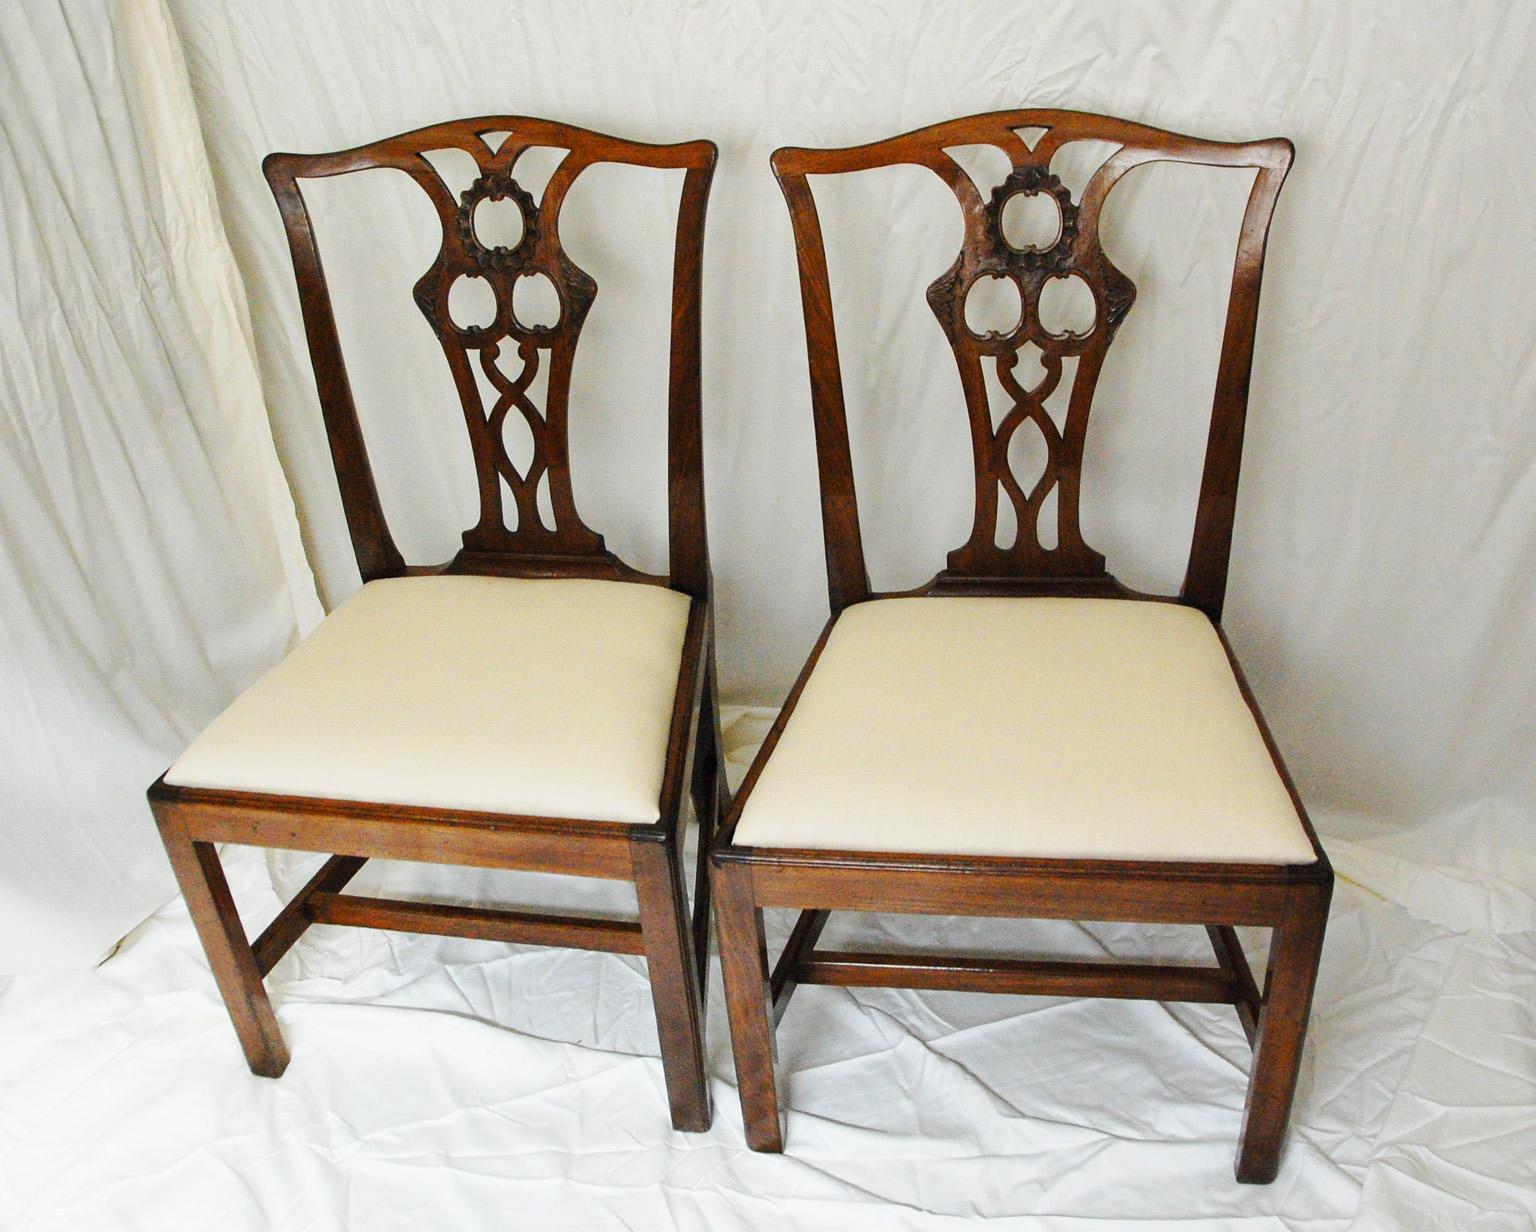 English Georgian Chippendale Period pair of carved mahogany sidechairs with slip seats, molded square legs, H stretcher and elegantly carved back. They have been through our workshop, so all joints are tight and firm. At some point in the last 100